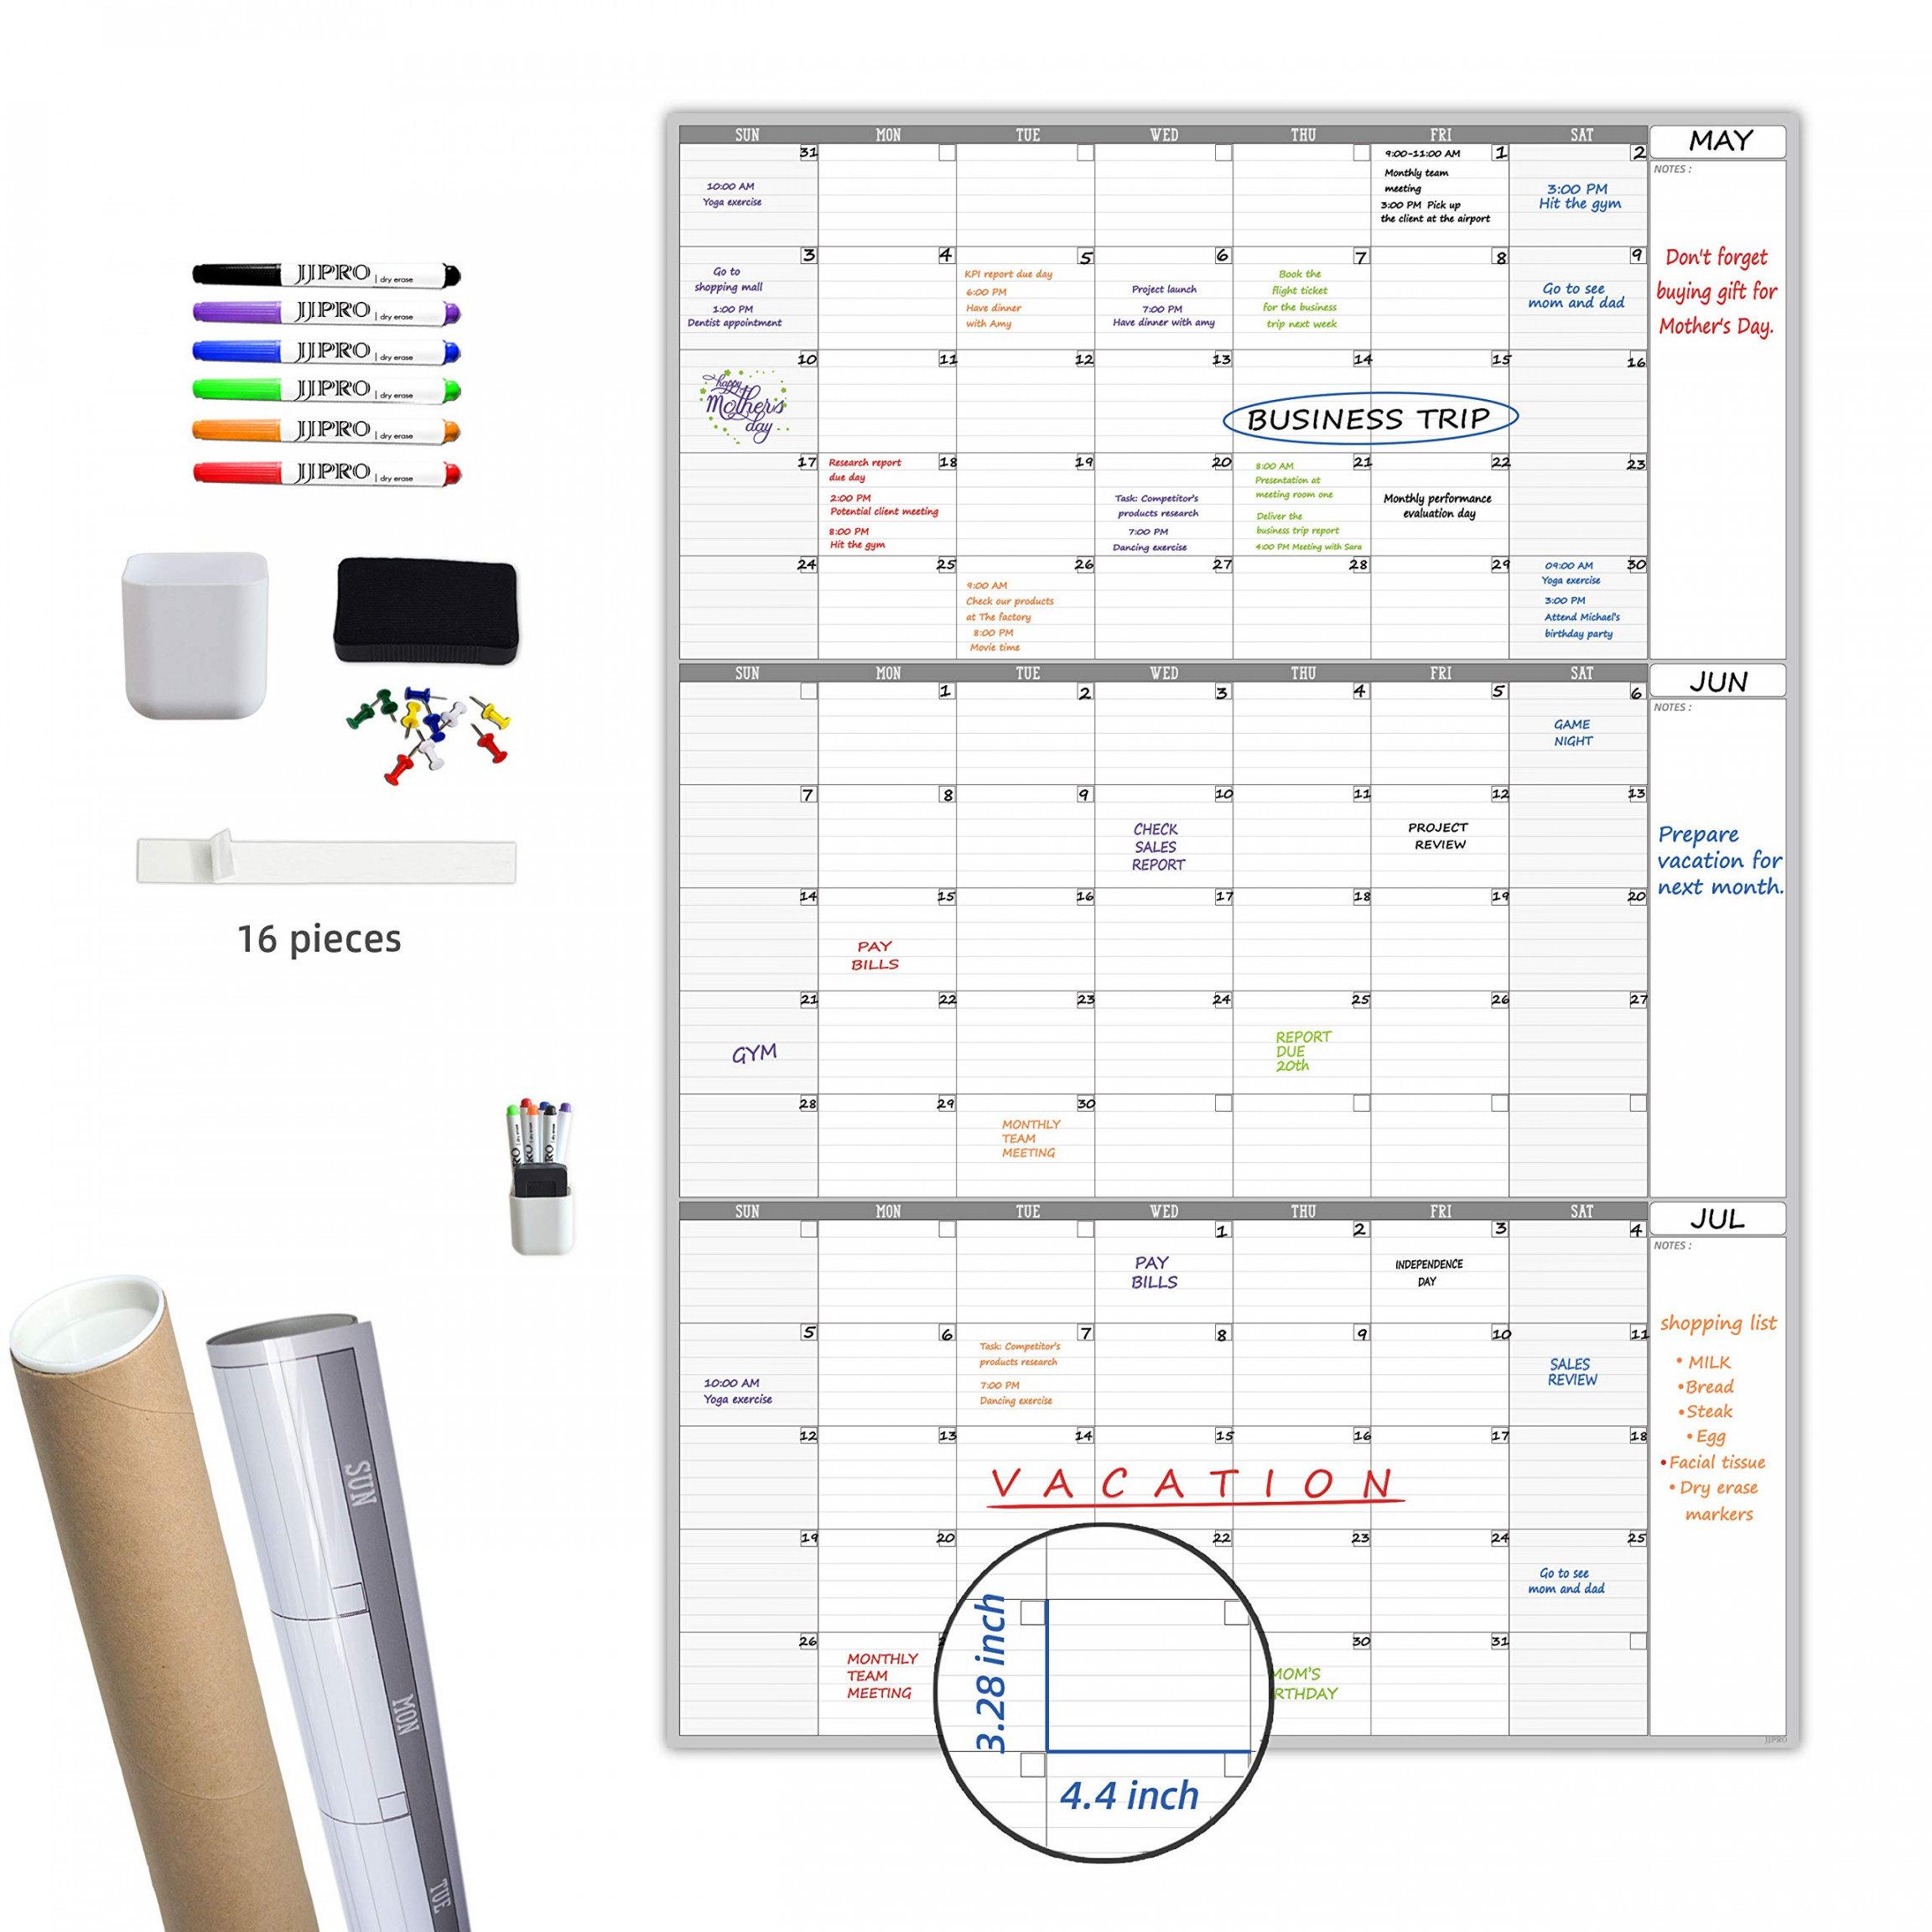 Large Dry Erase Calendar for Wall - Month Wall Calendar, 6"x"(Vertical)  - Monthly Calendar for Home,Office,Classroom -Whiteboard Premium Laminated